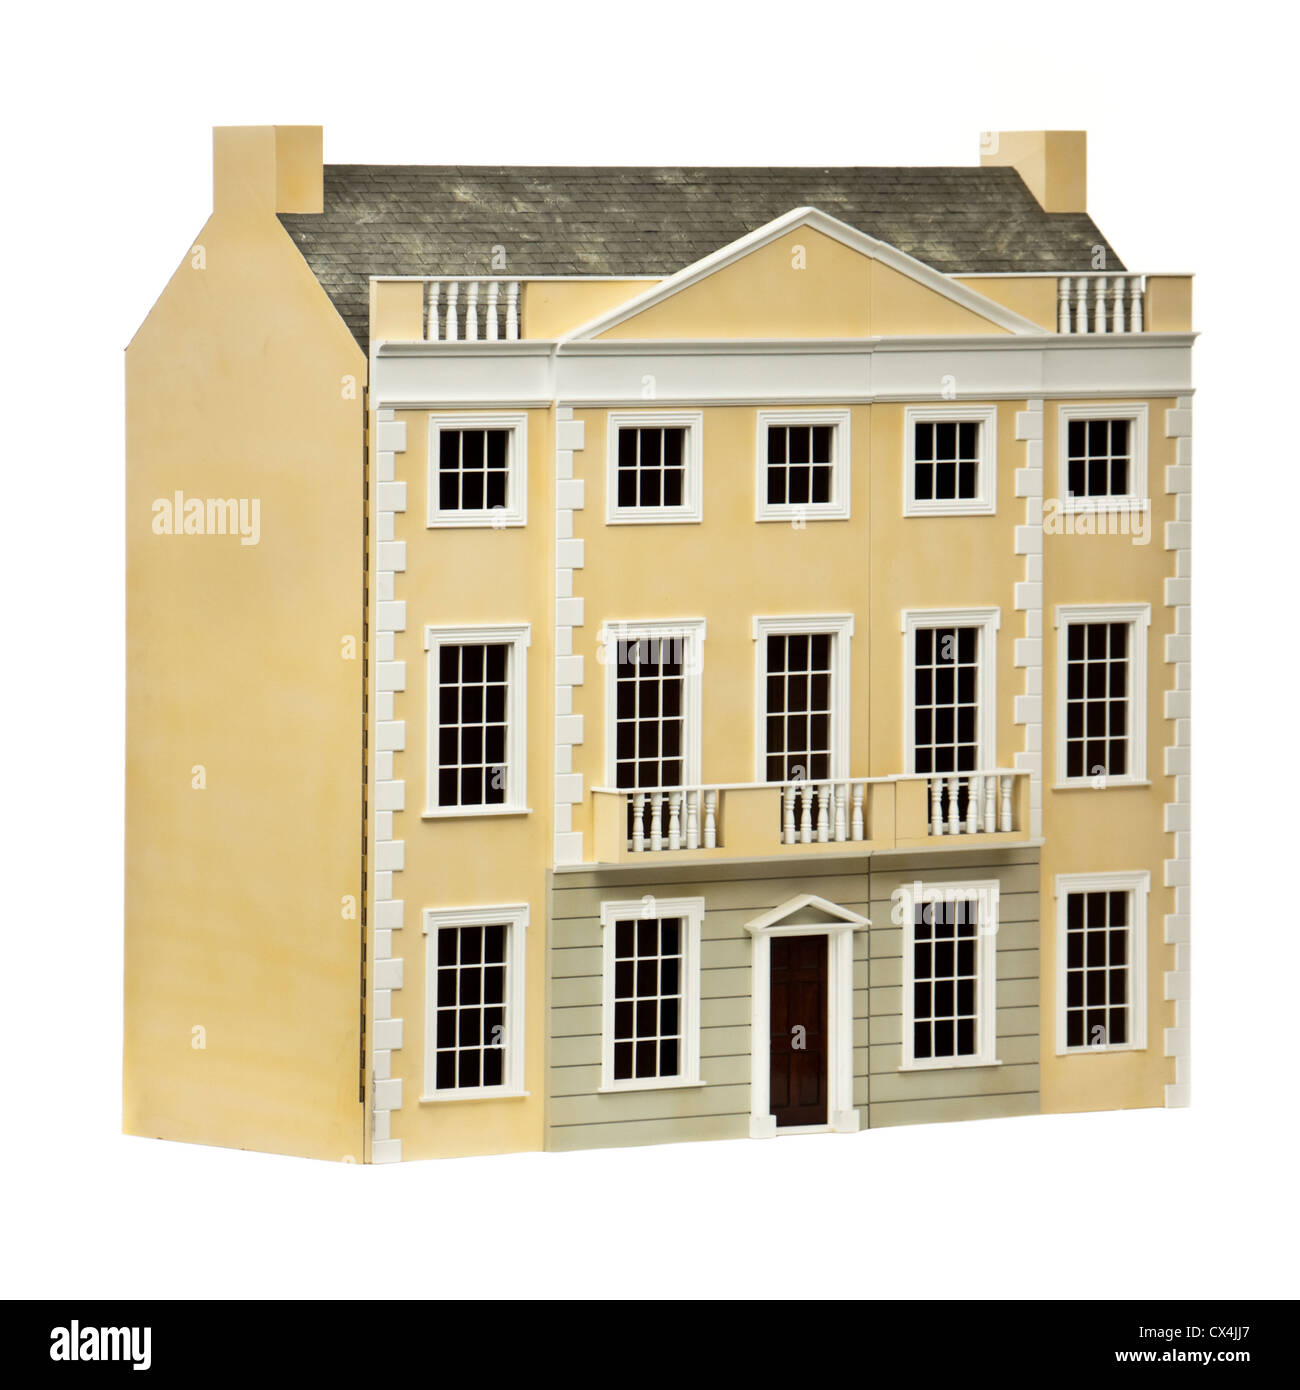 Large dolls house with Georgian facade Stock Photo